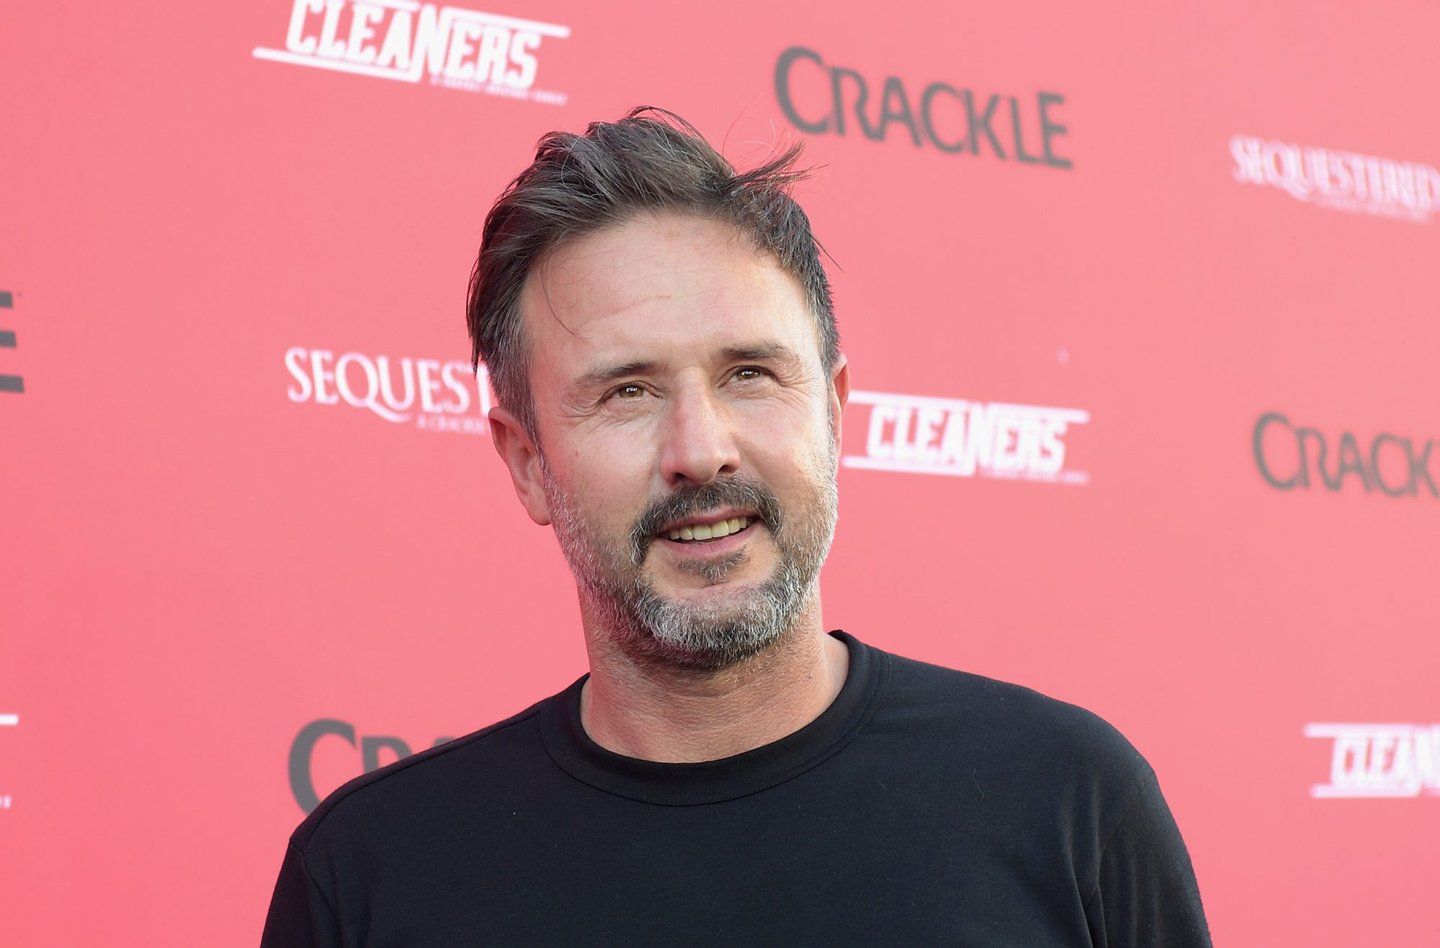 WEST HOLLYWOOD, CA - AUGUST 14: Actor David Arquette attends Crackle's Summer Premieres Event Celebrating The Launch Of "Sequestered" And "Cleaners" Season 2 at 1 OAK on August 14, 2014 in West Hollywood, California. (Photo by Jason Kempin/Getty Images)